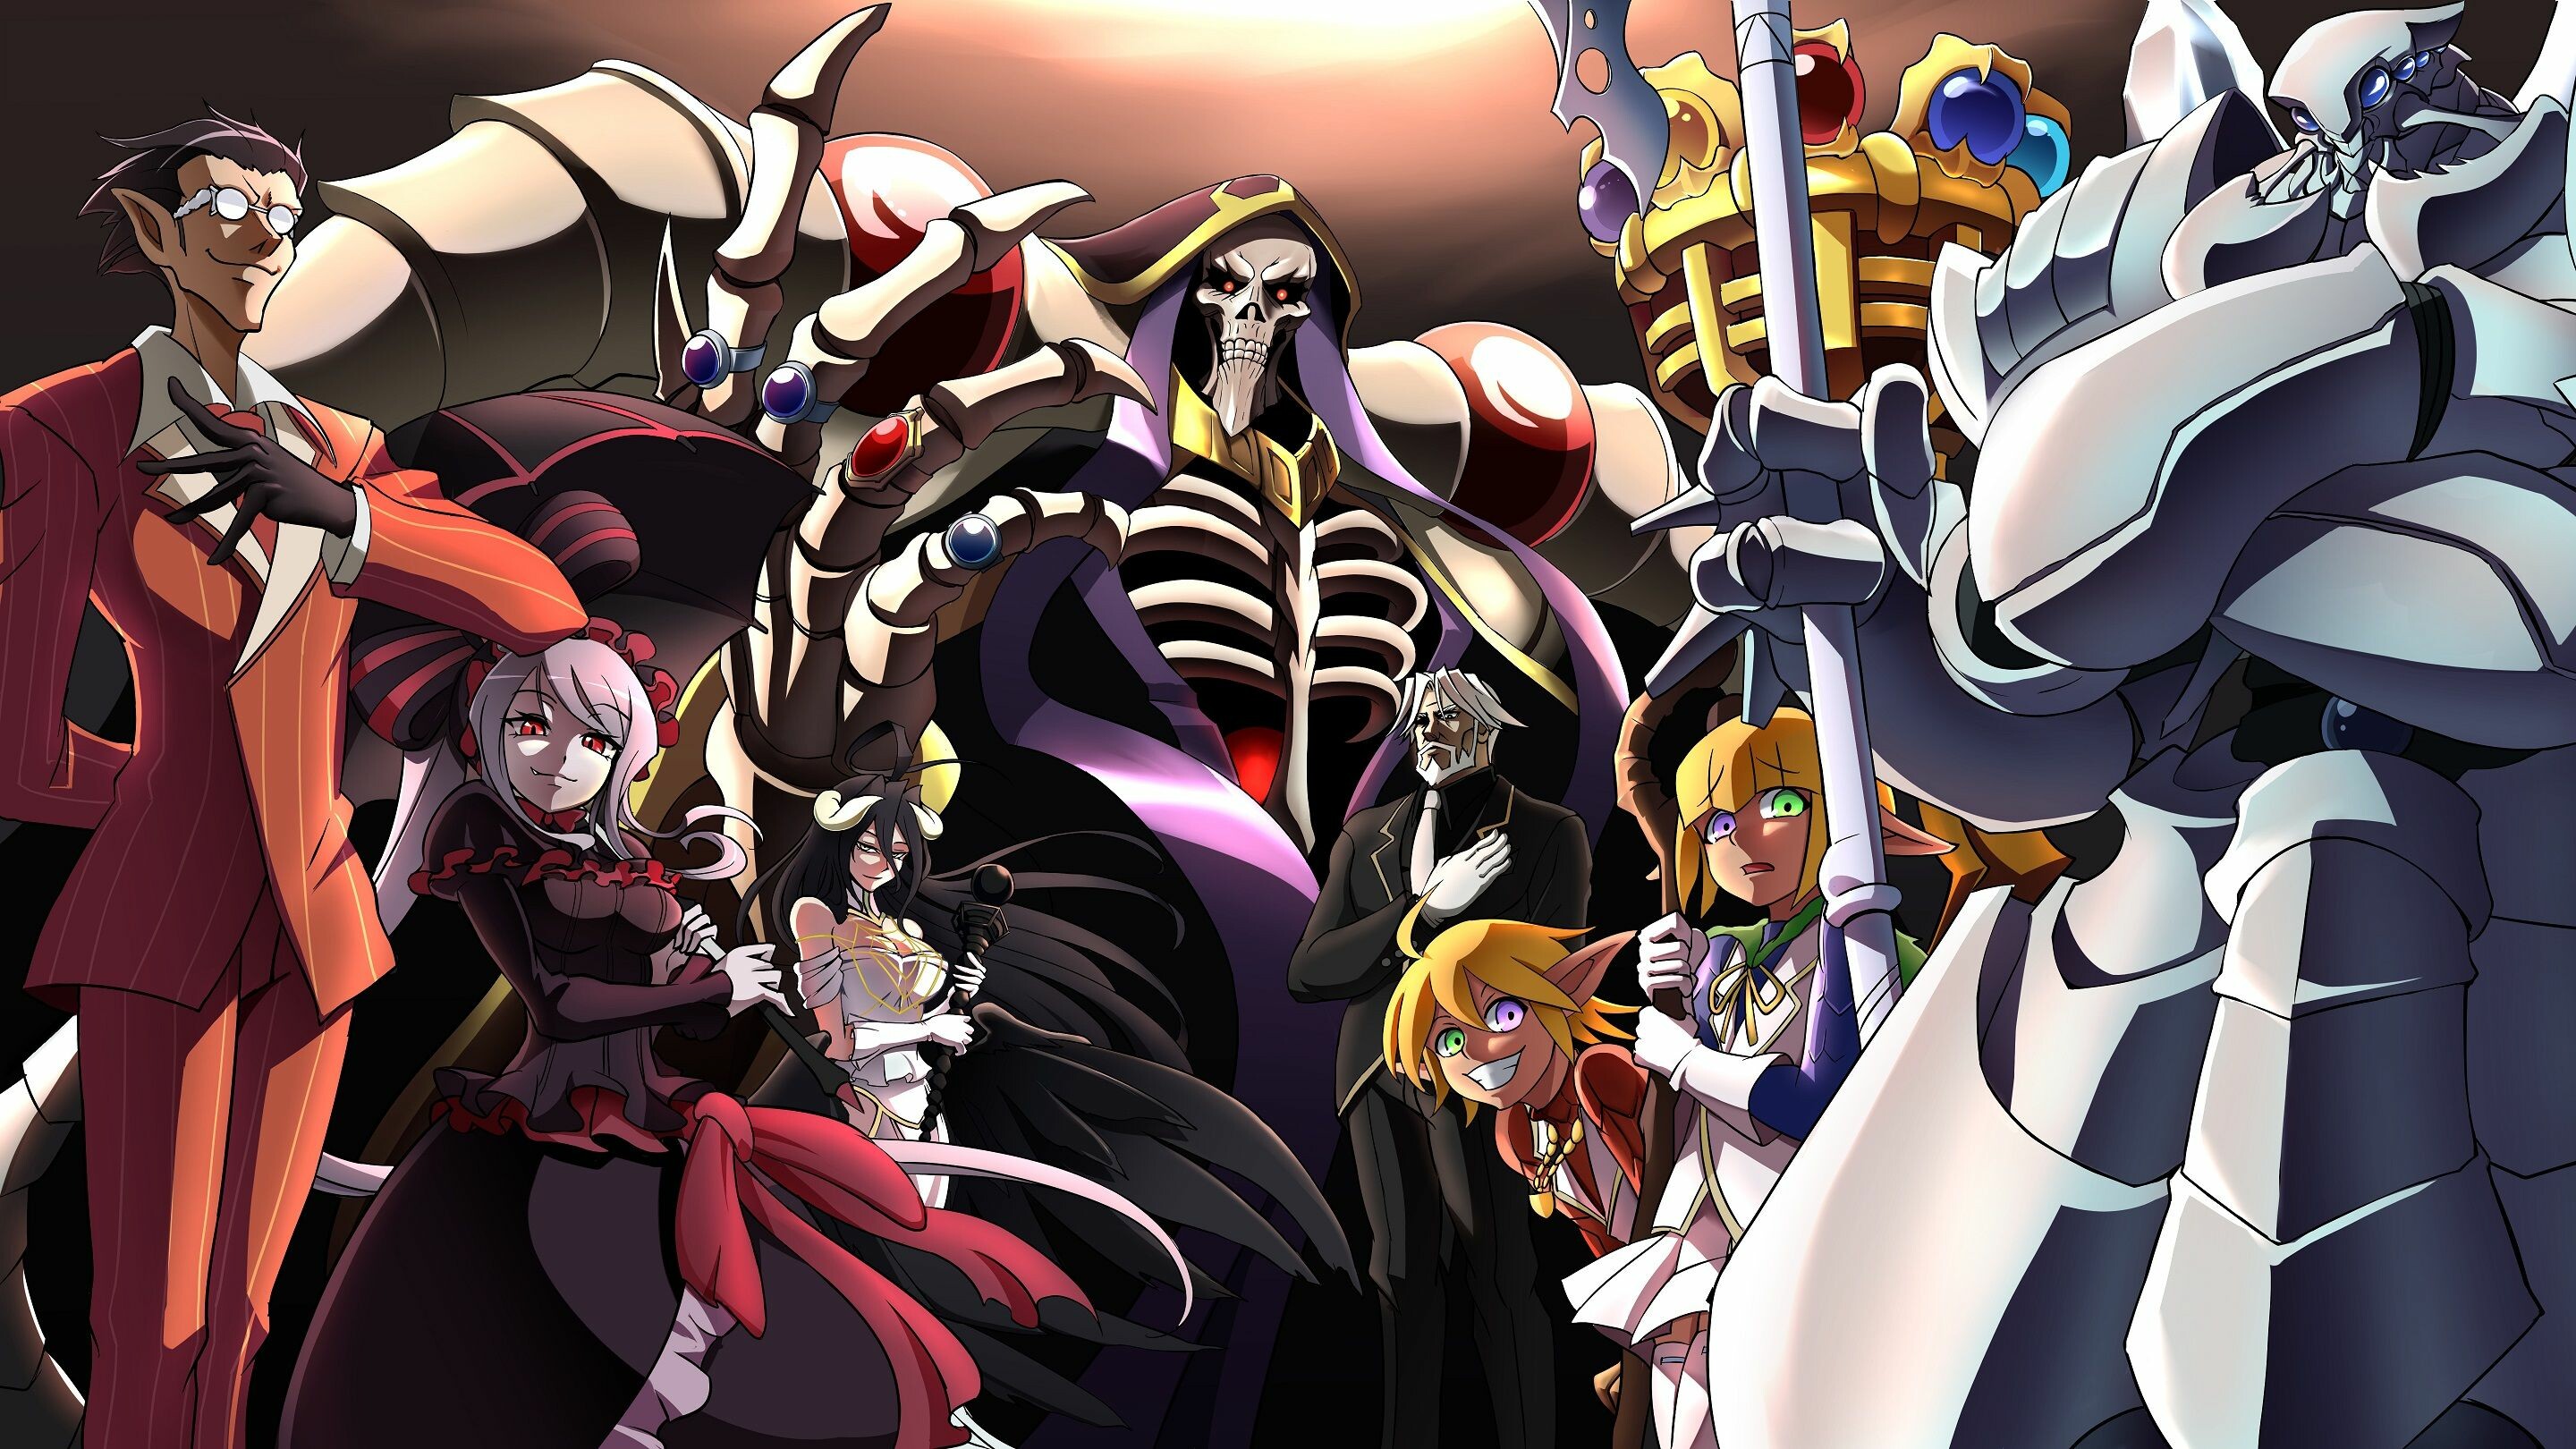 Overlord: Anim, The opening theme is "Clattanoia" by OxT, Ainz Ooal Gown. 2880x1620 HD Background.